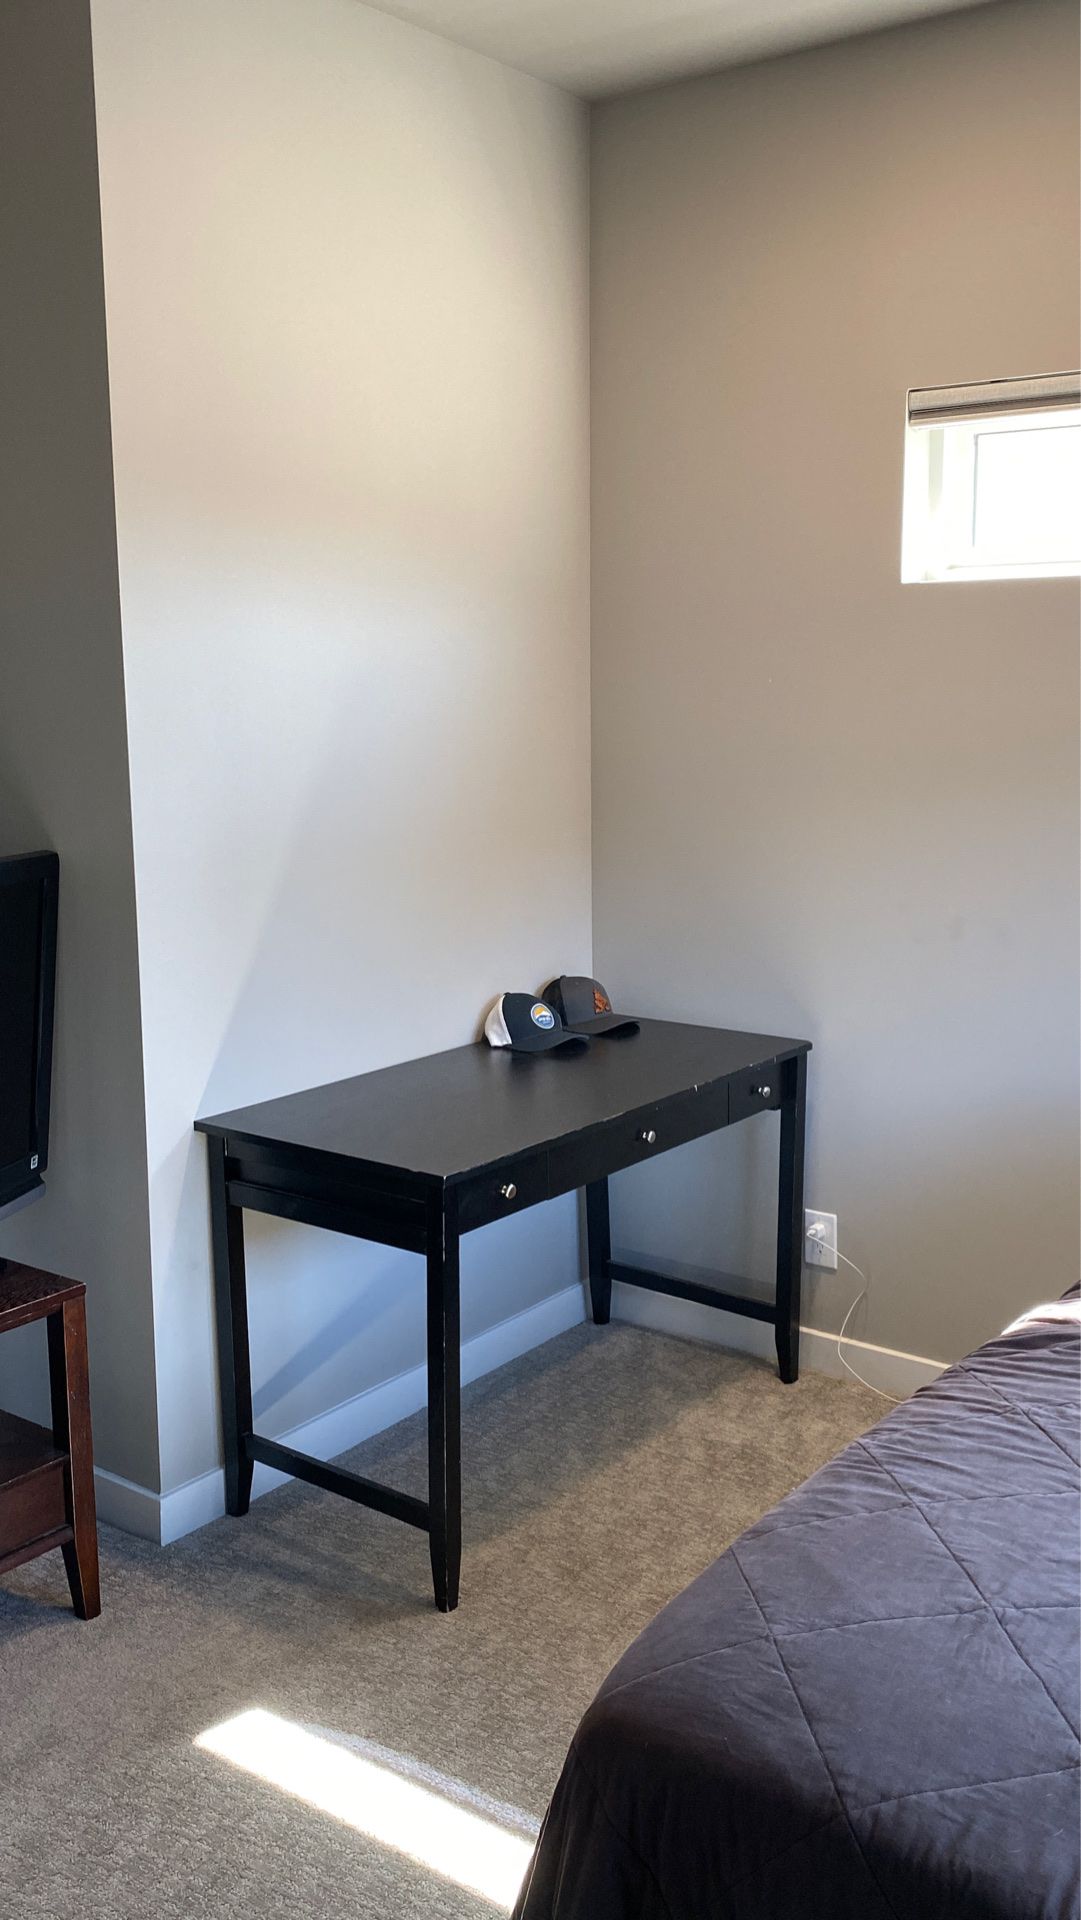 Desk and table stand for $20